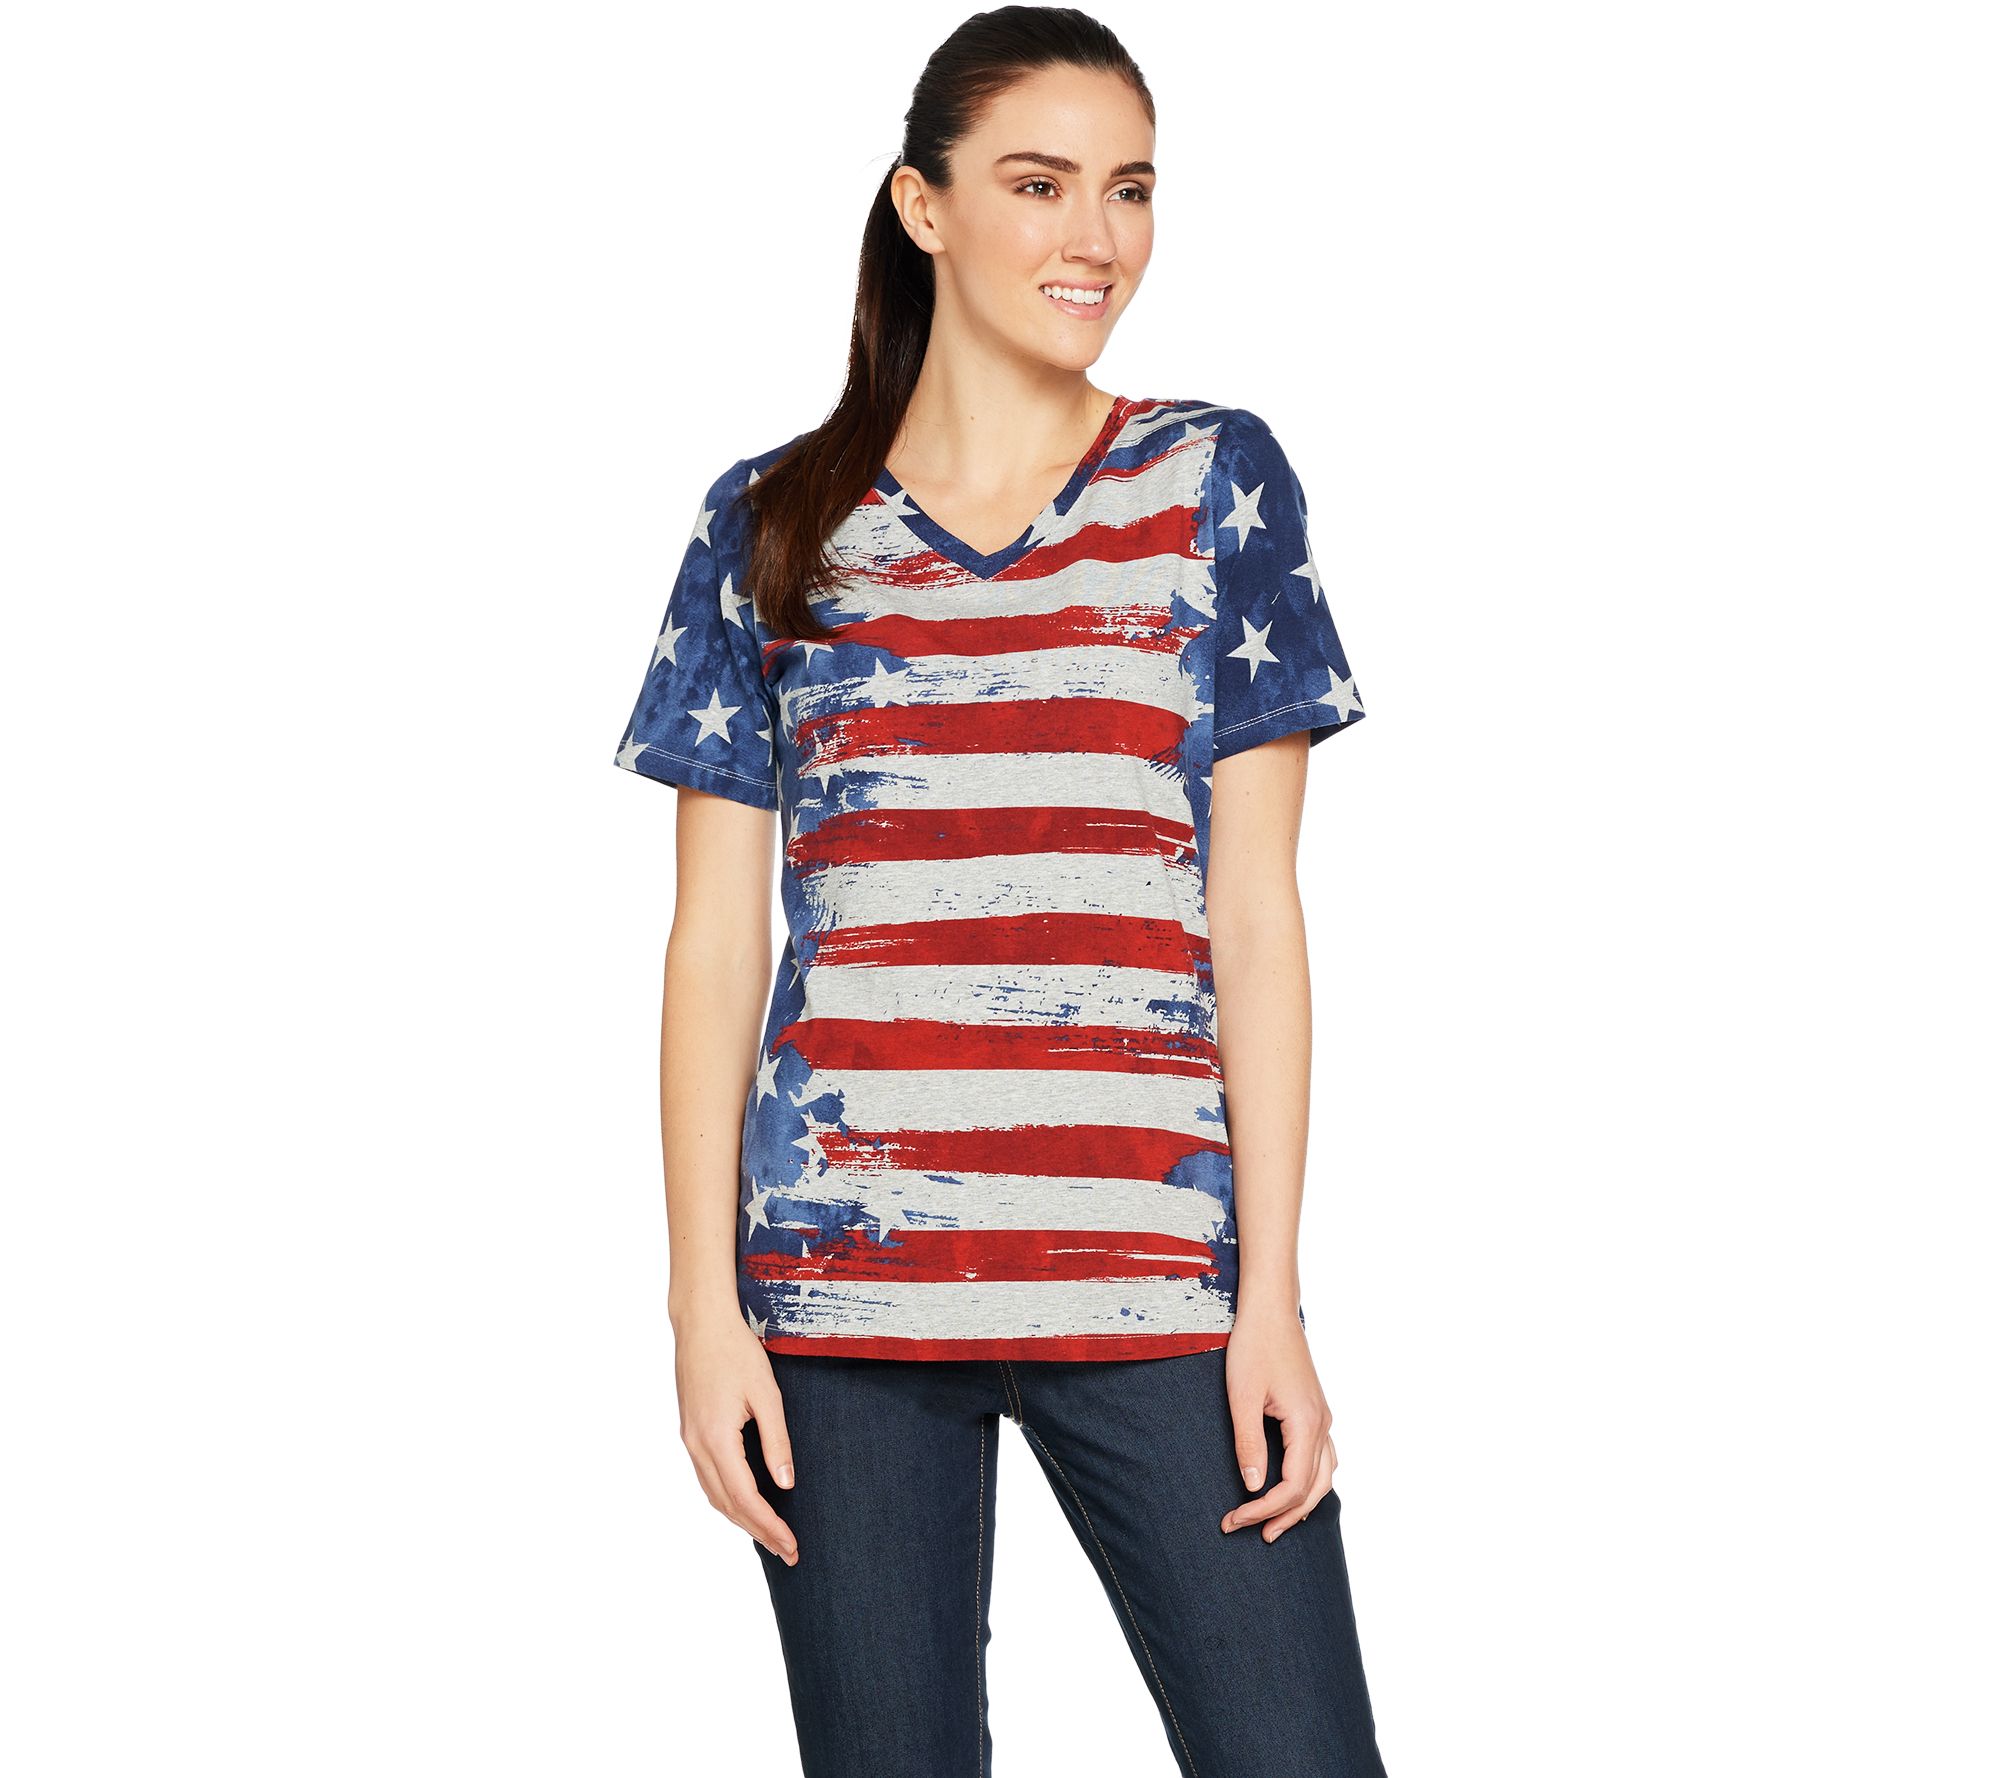 Womens Casual Round Neck Loose Fit Short Sleeve Love Printed T-Shirt American Flag Blouse Tops 